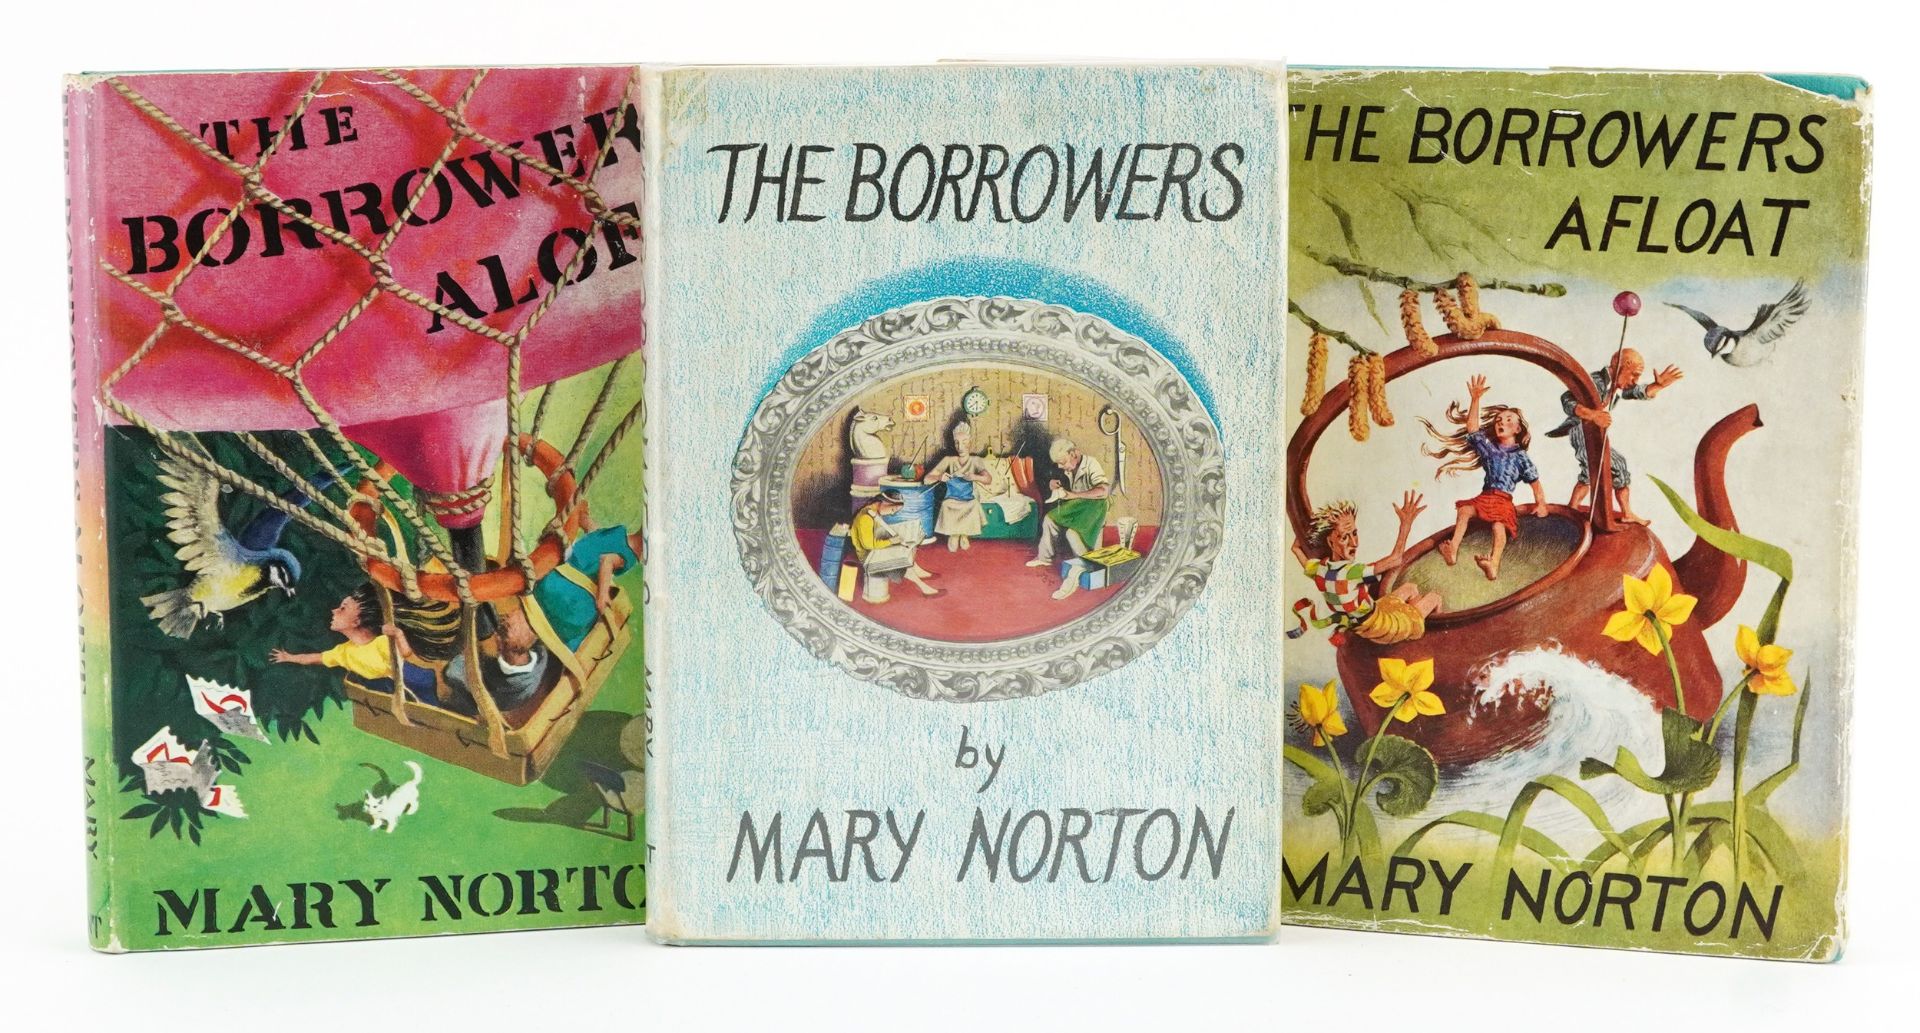 Two The Borrowers Afloat children's books including a 1959 first edition, together with a copy of